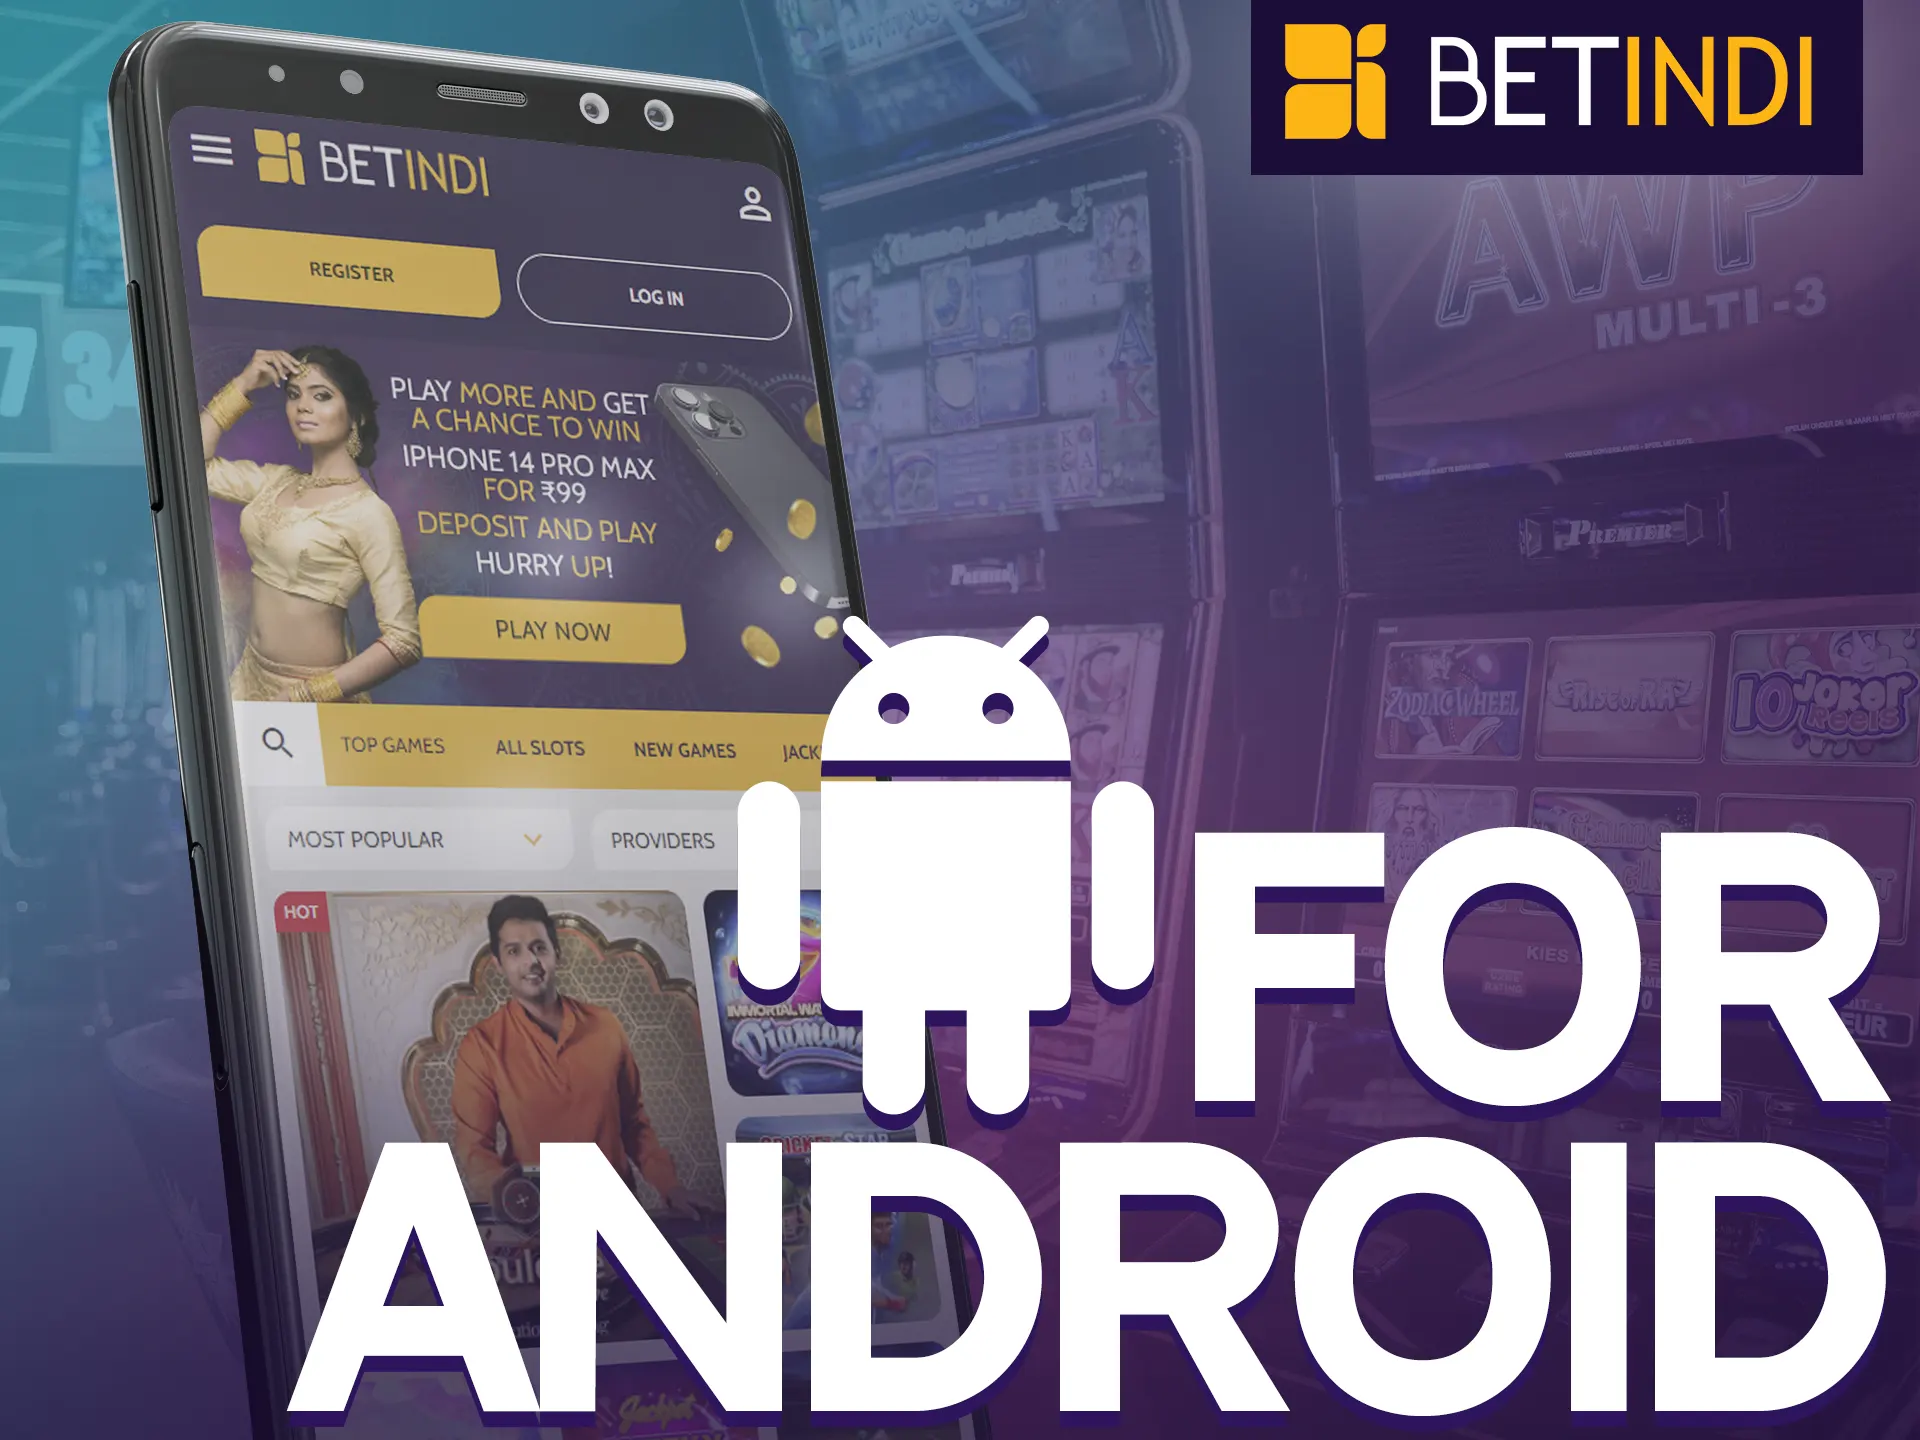 Betindi's Android app offers convenient gambling access.